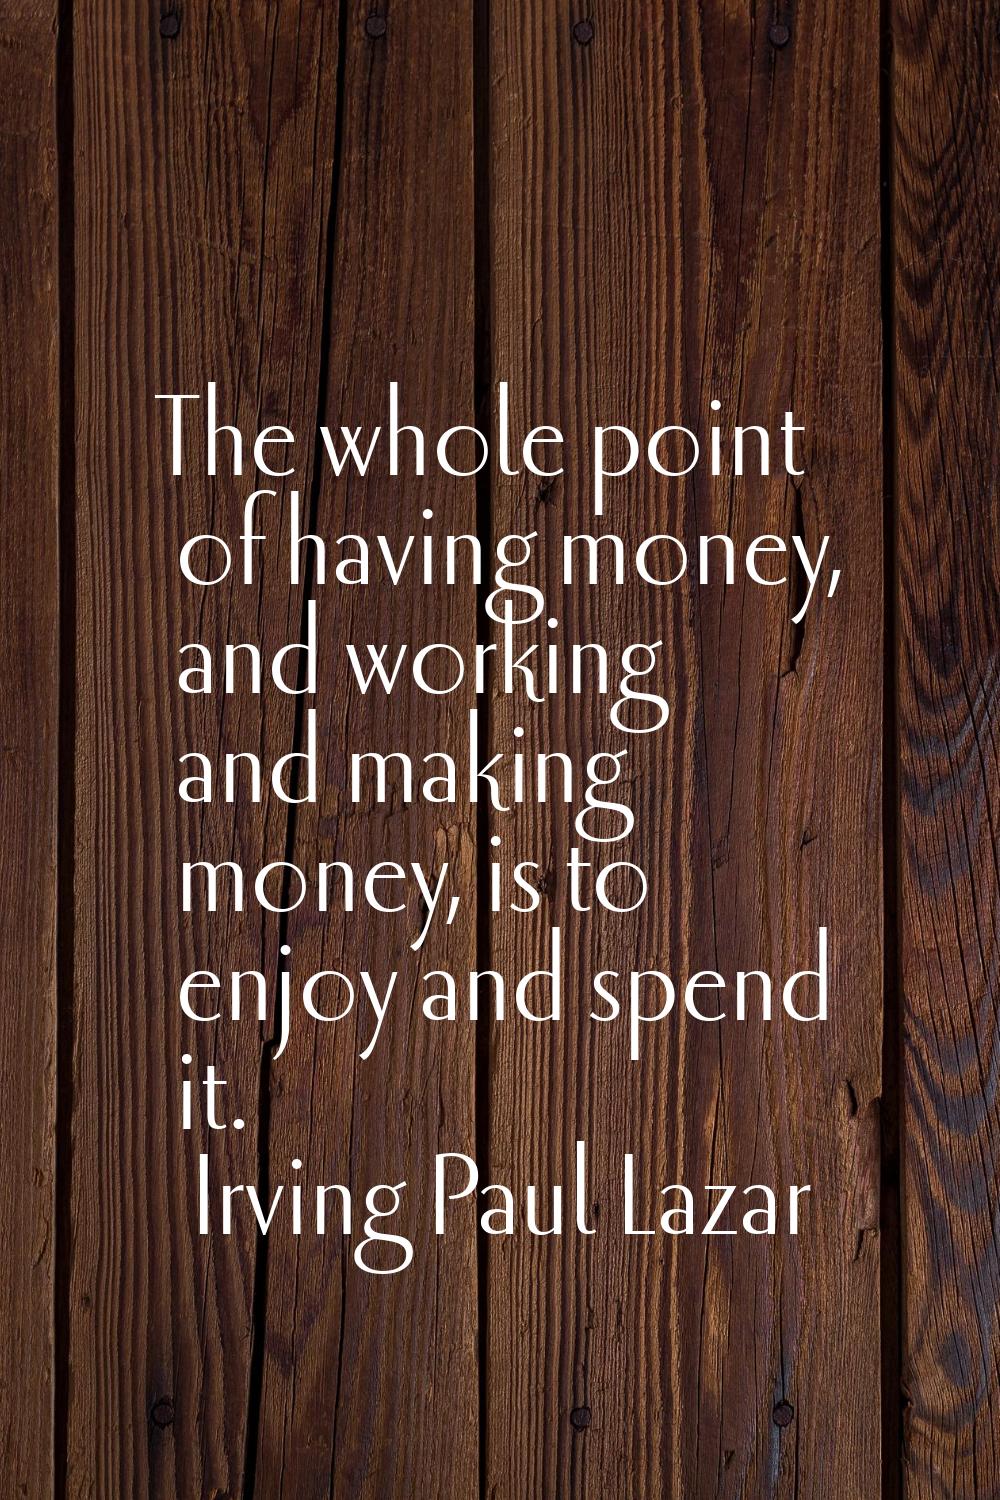 The whole point of having money, and working and making money, is to enjoy and spend it.